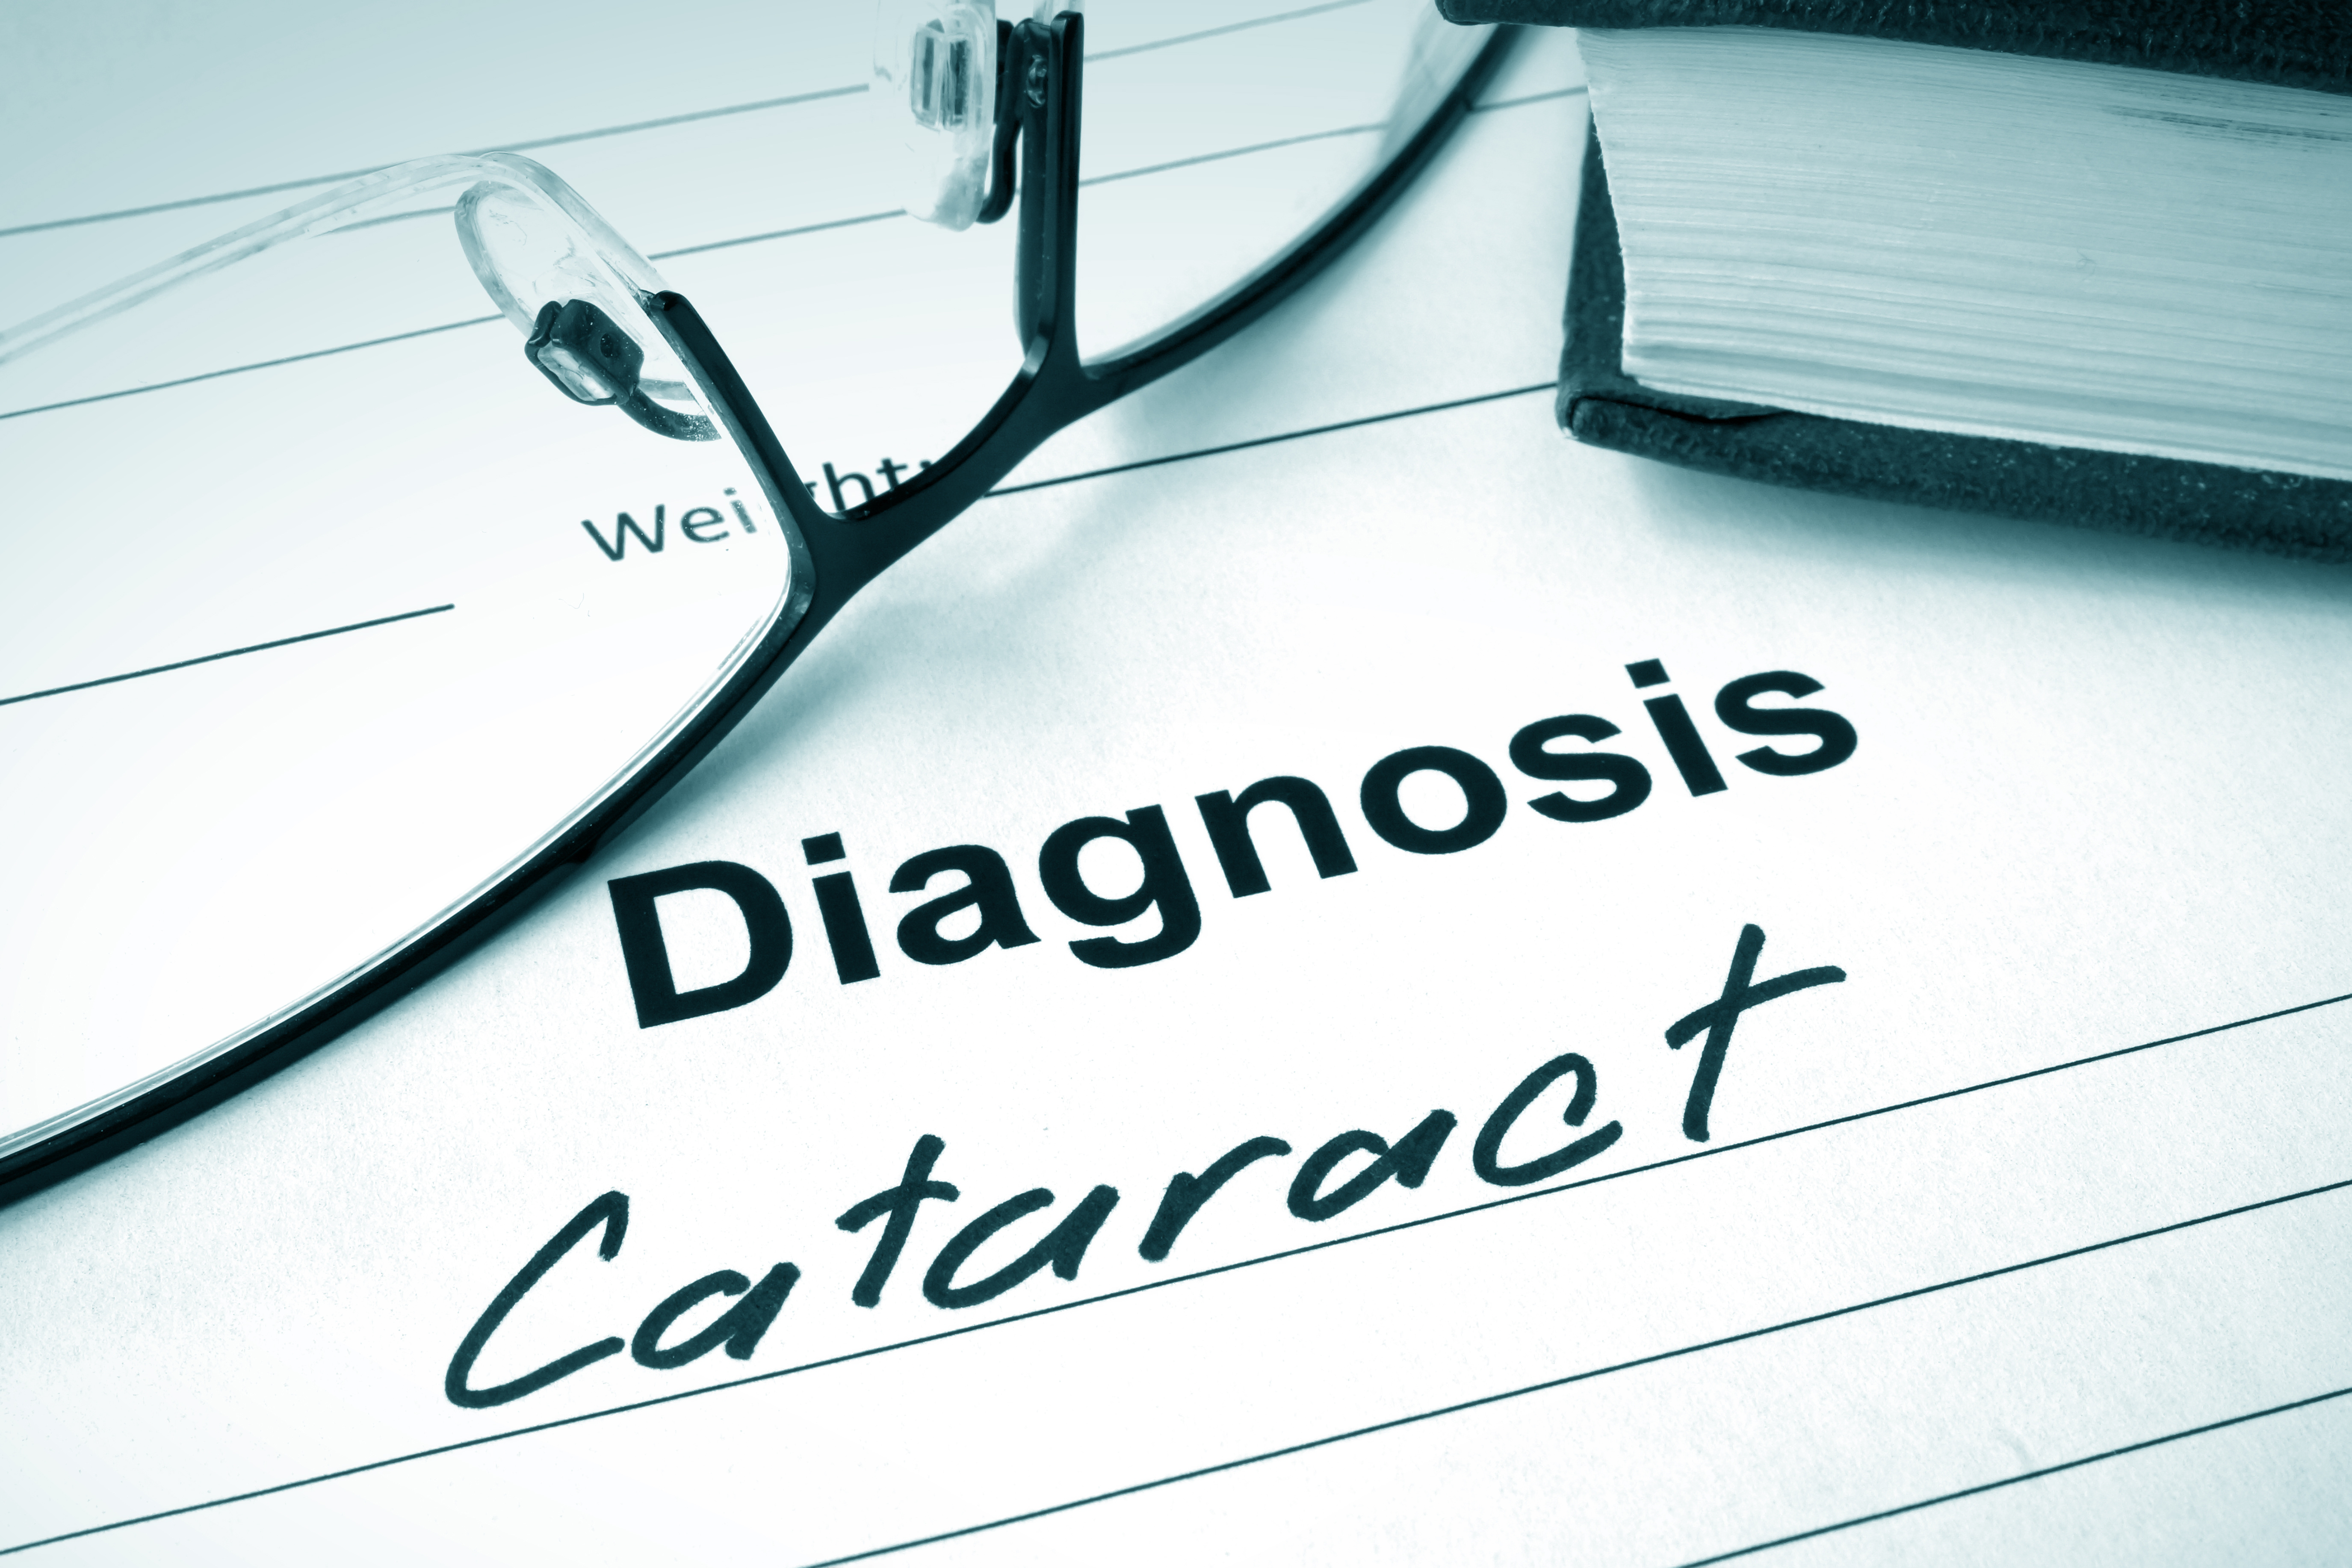 What causes early onset cataracts?